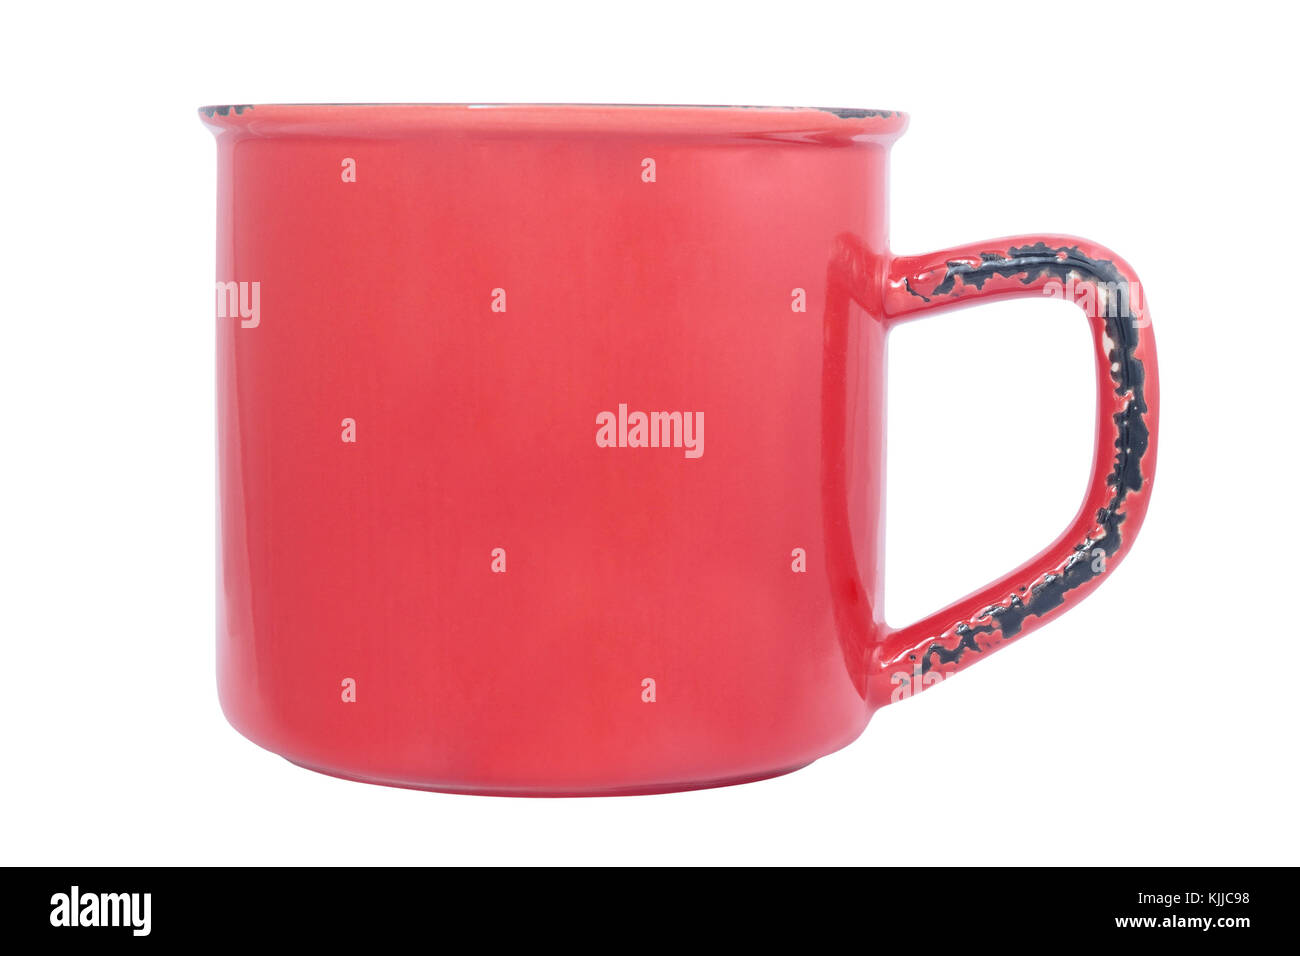 Enamel mug Cut Out Stock Images & Pictures - Alamy